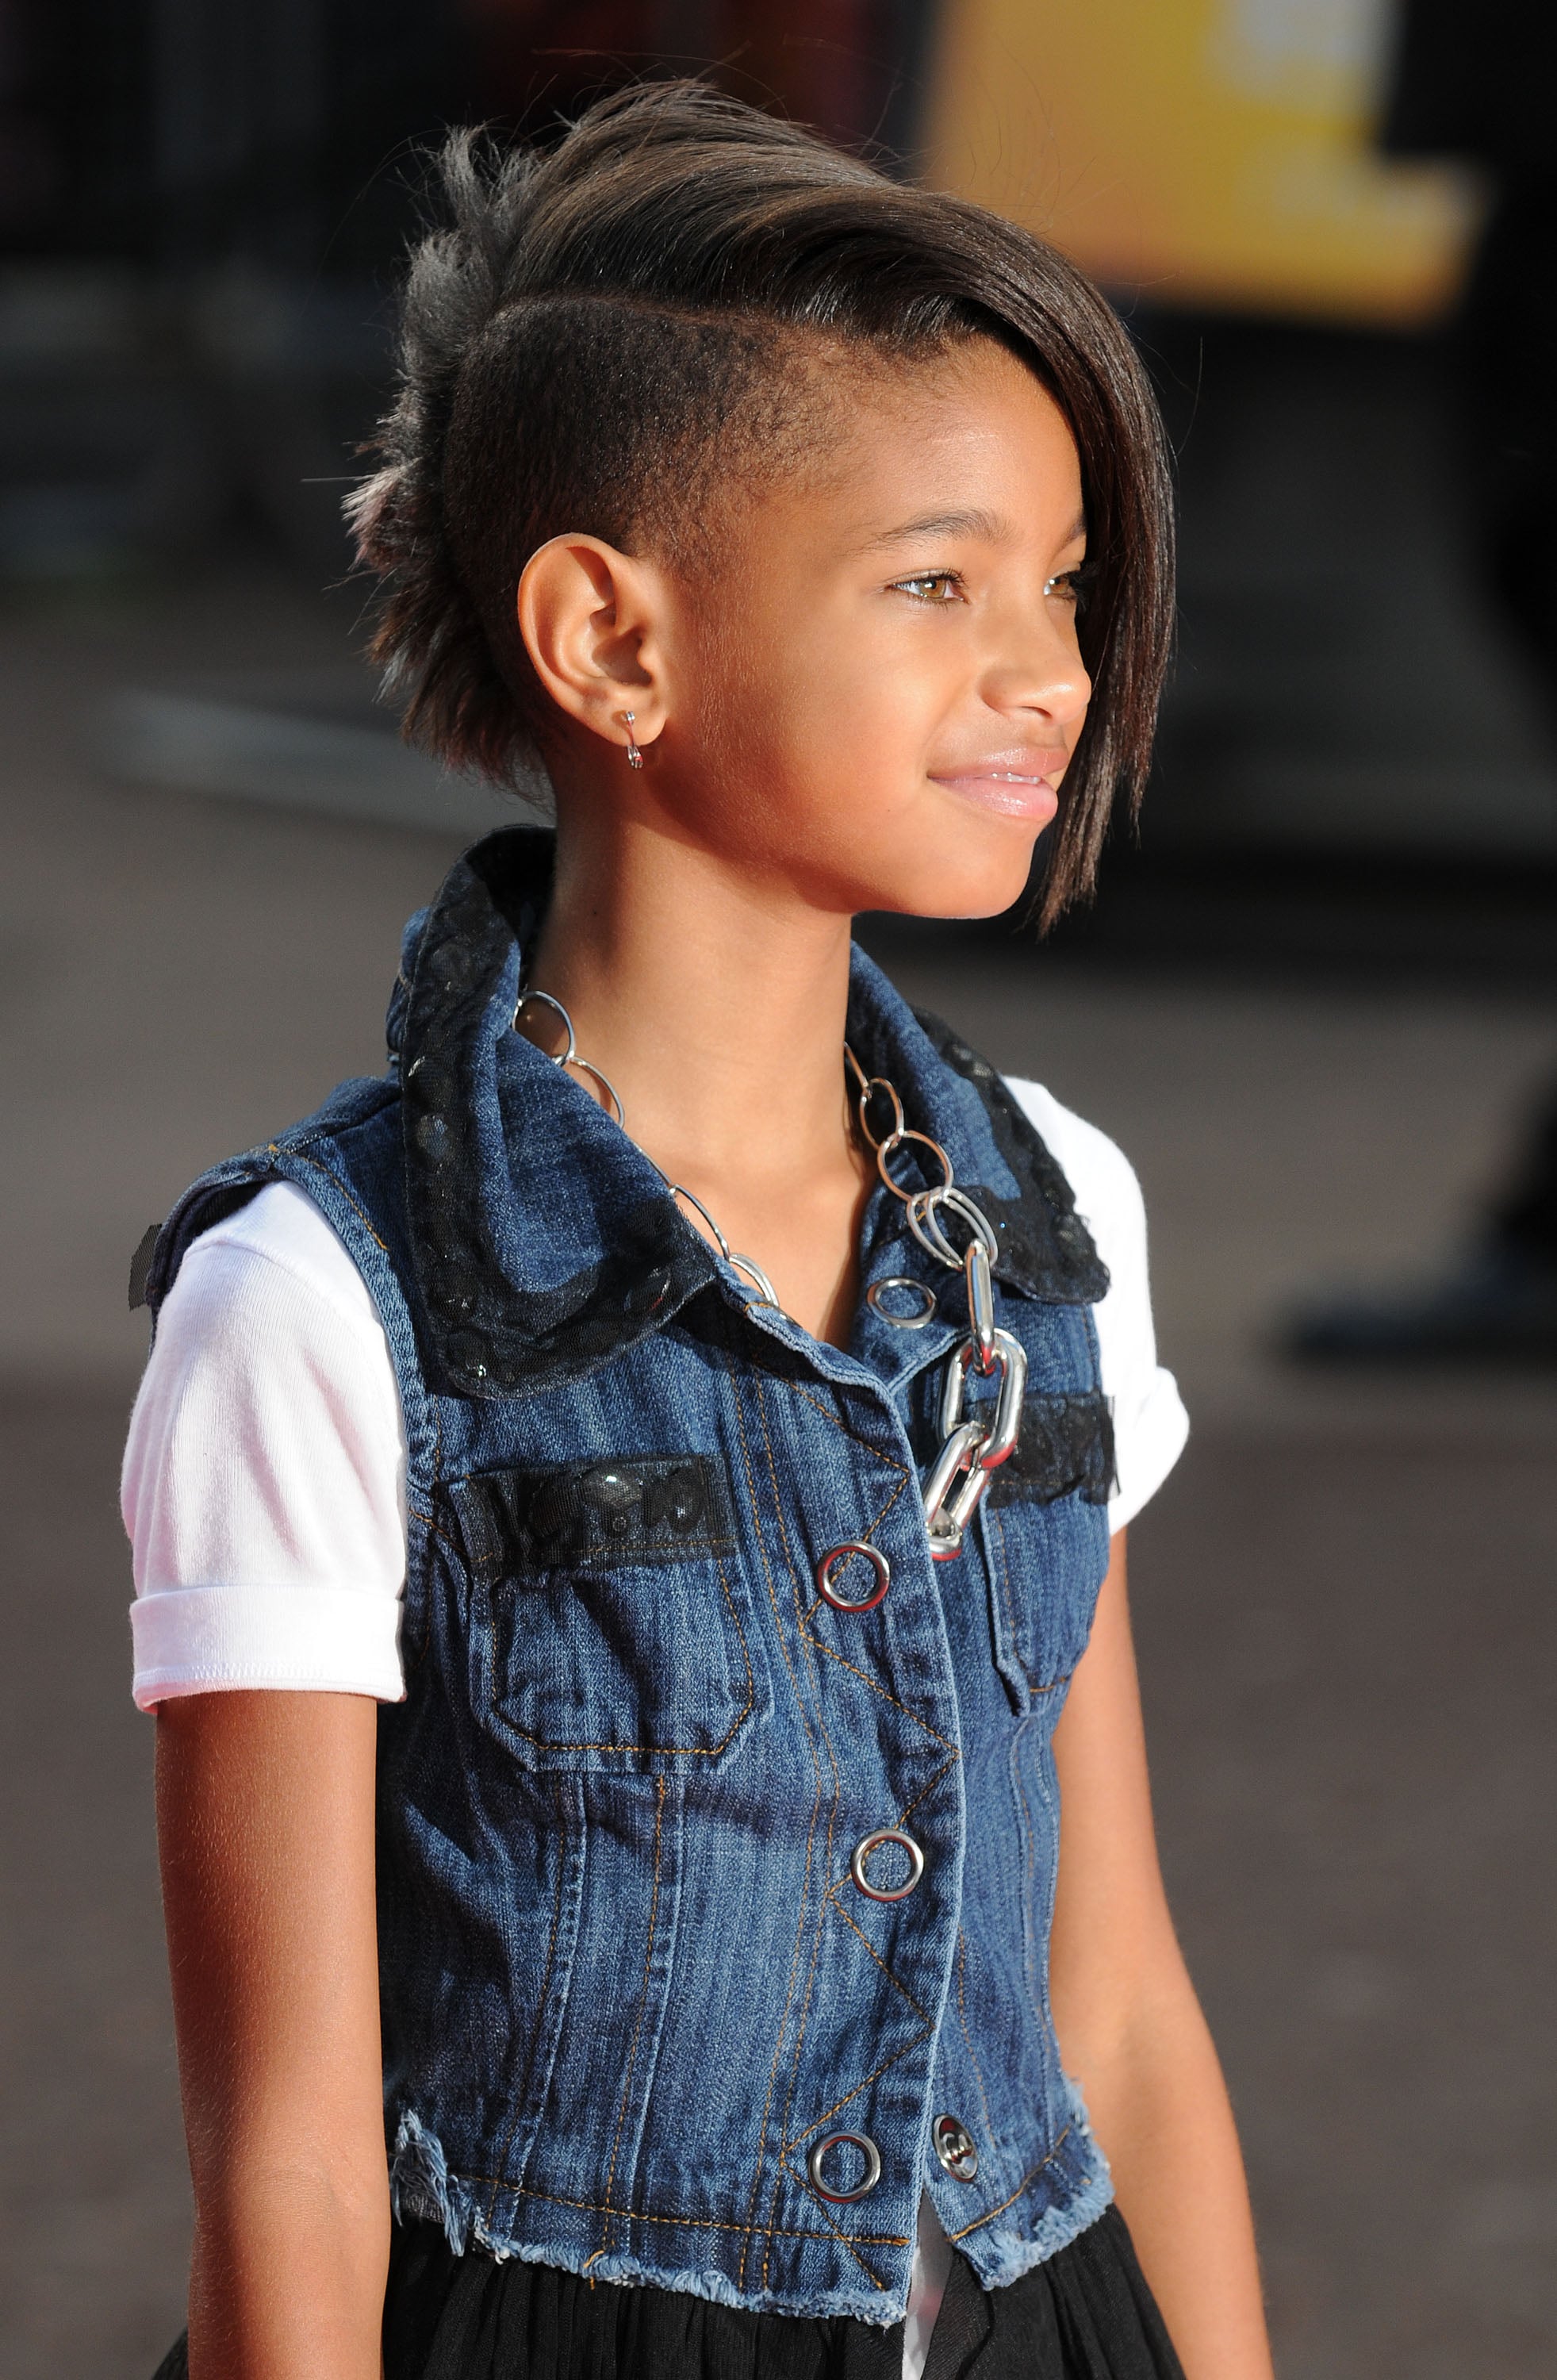 Another Example Willow Half Shaved Head Looking Fierce 